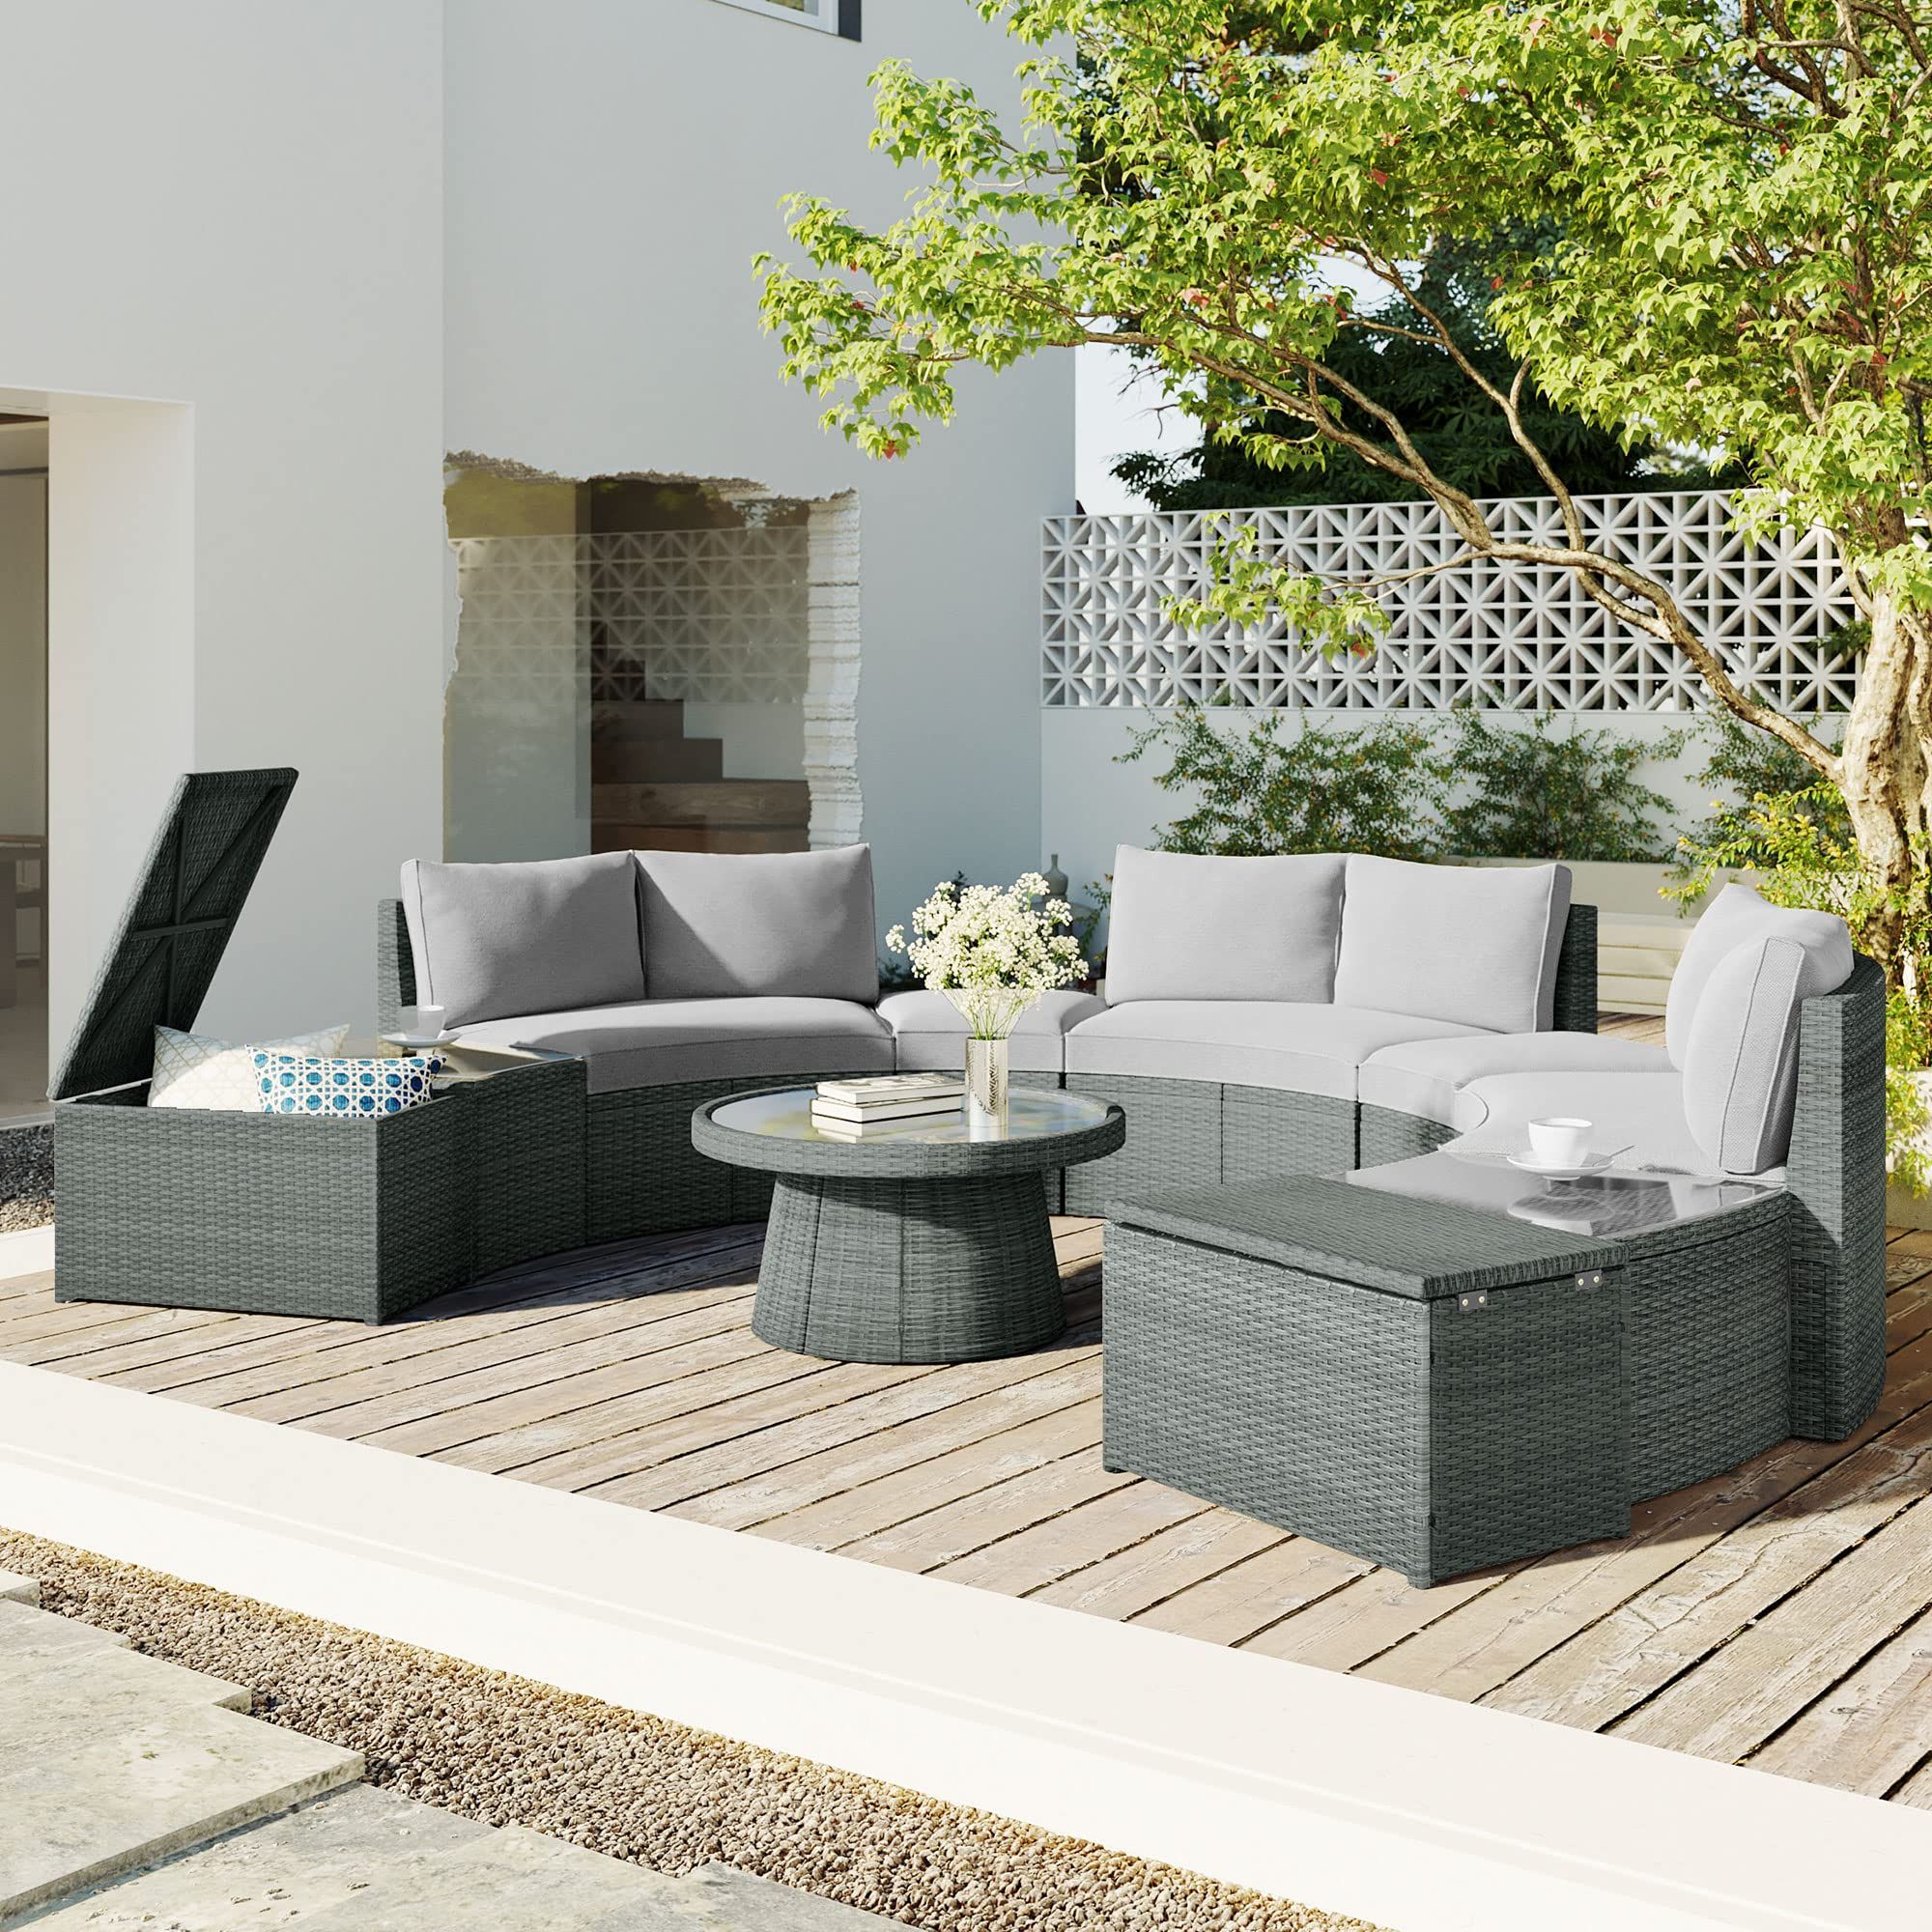 Amazon: Yswh 10 Piece Outdoor Half Moon Sofa Set, Rattan Patio  Furniture Half Round Sofa Set With Round Table And Storage Stools,  Sectional Conversational Sofa Set For Free Combination : Patio, Lawn & Pertaining To Trendy Outdoor Half Round Coffee Tables (View 3 of 10)